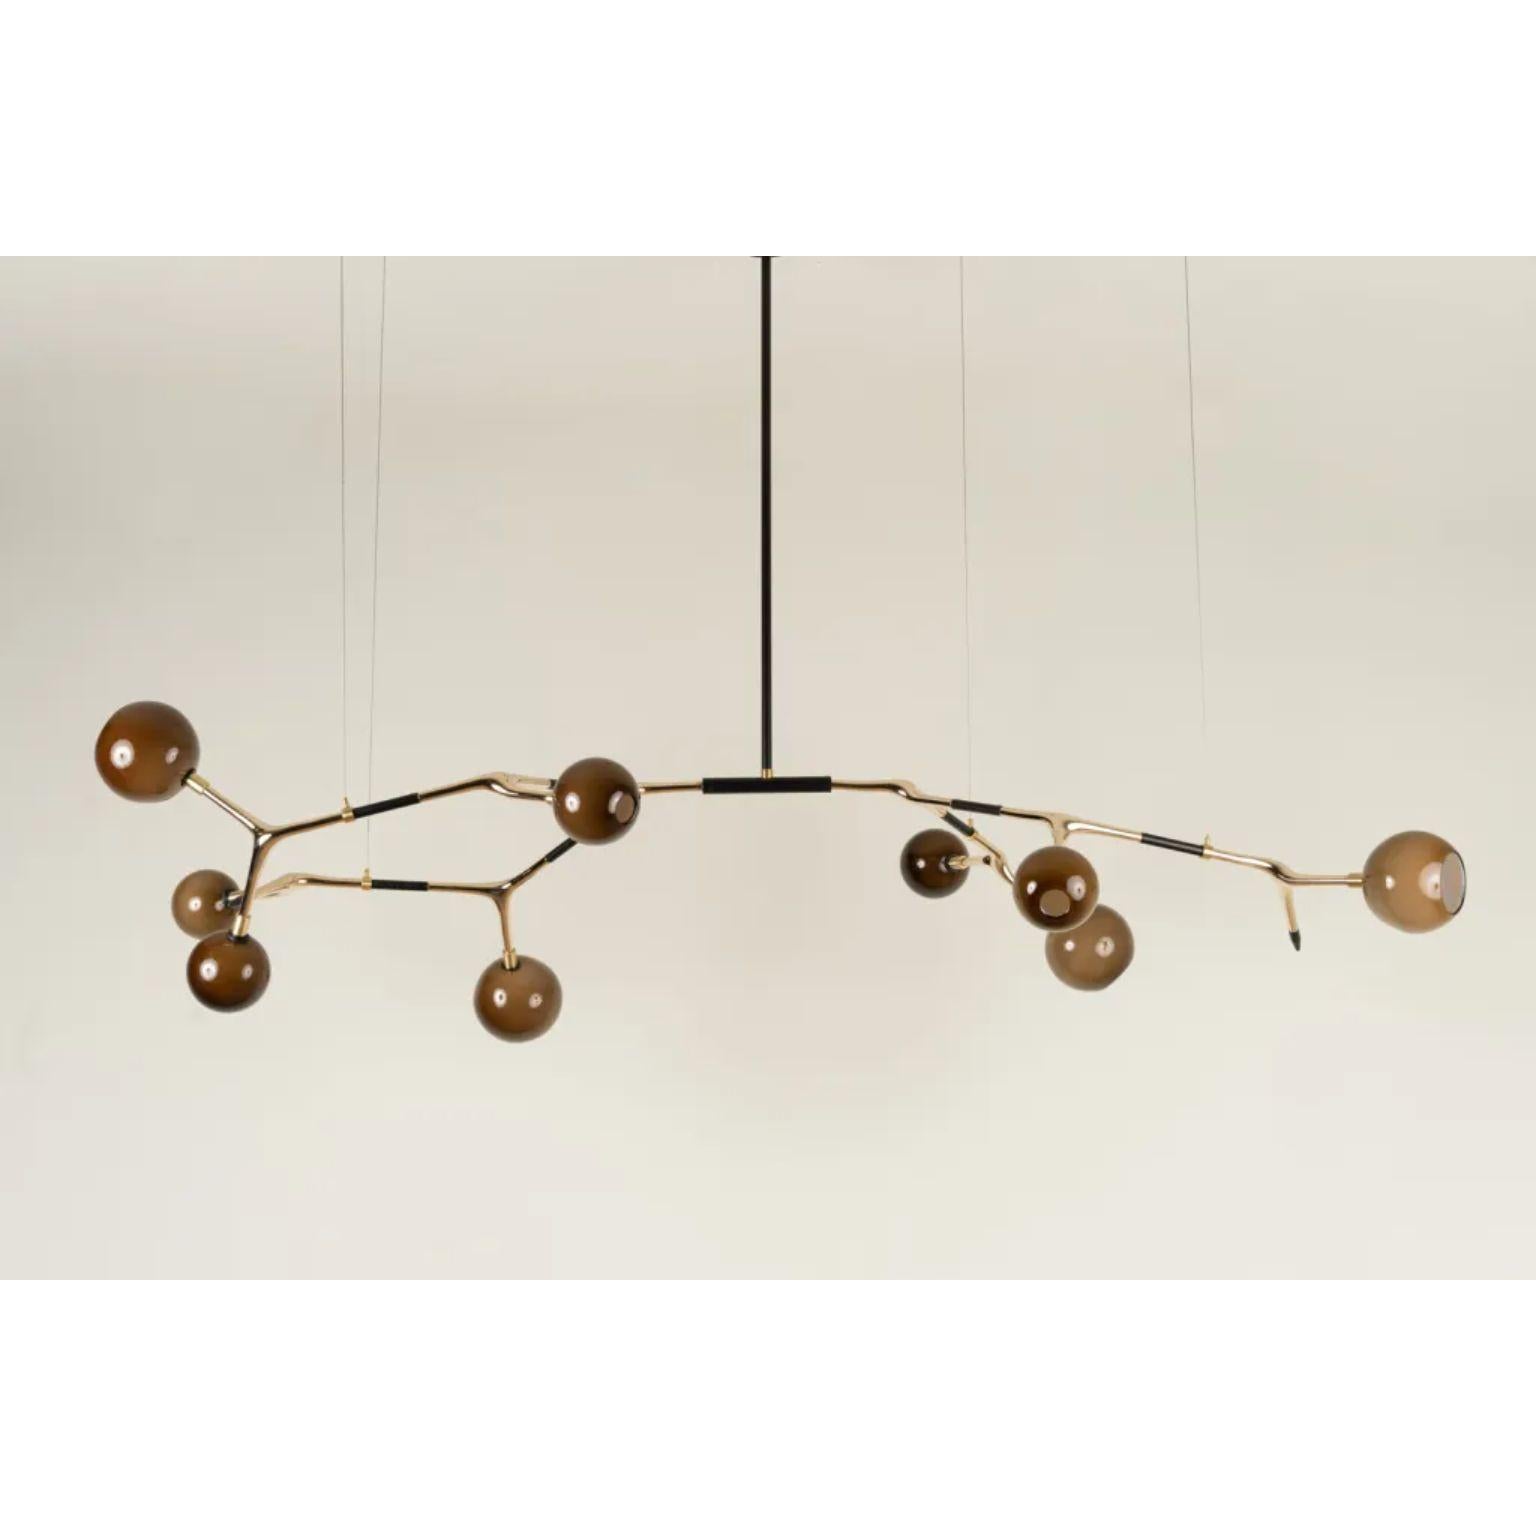 Coffee and Polished Bronze Mantis 9 Pendant Lamp by Isabel Moncada
Dimensions: D 100 x W 190 x H 110 cm.
Materials: Cast bronze, blown glass and turned brass.

Mantis 9, discreet and elegant with measured dimensions. For a medium and sober table,